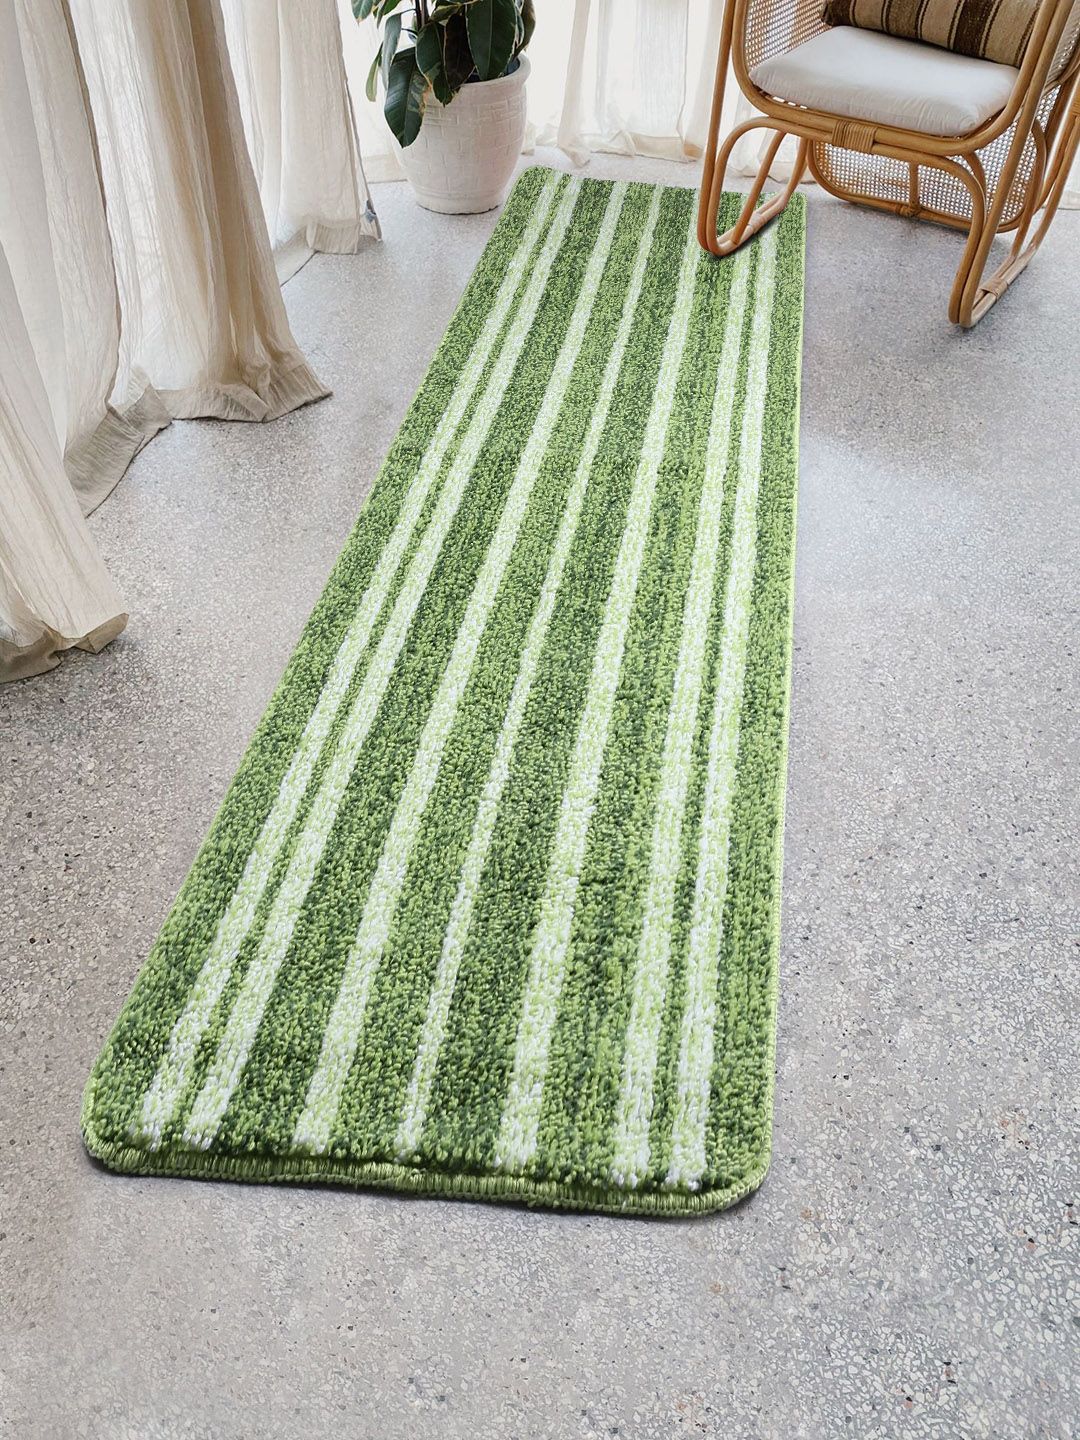 Saral Home Green & White Striped Anti-Skid Floor Runner Price in India